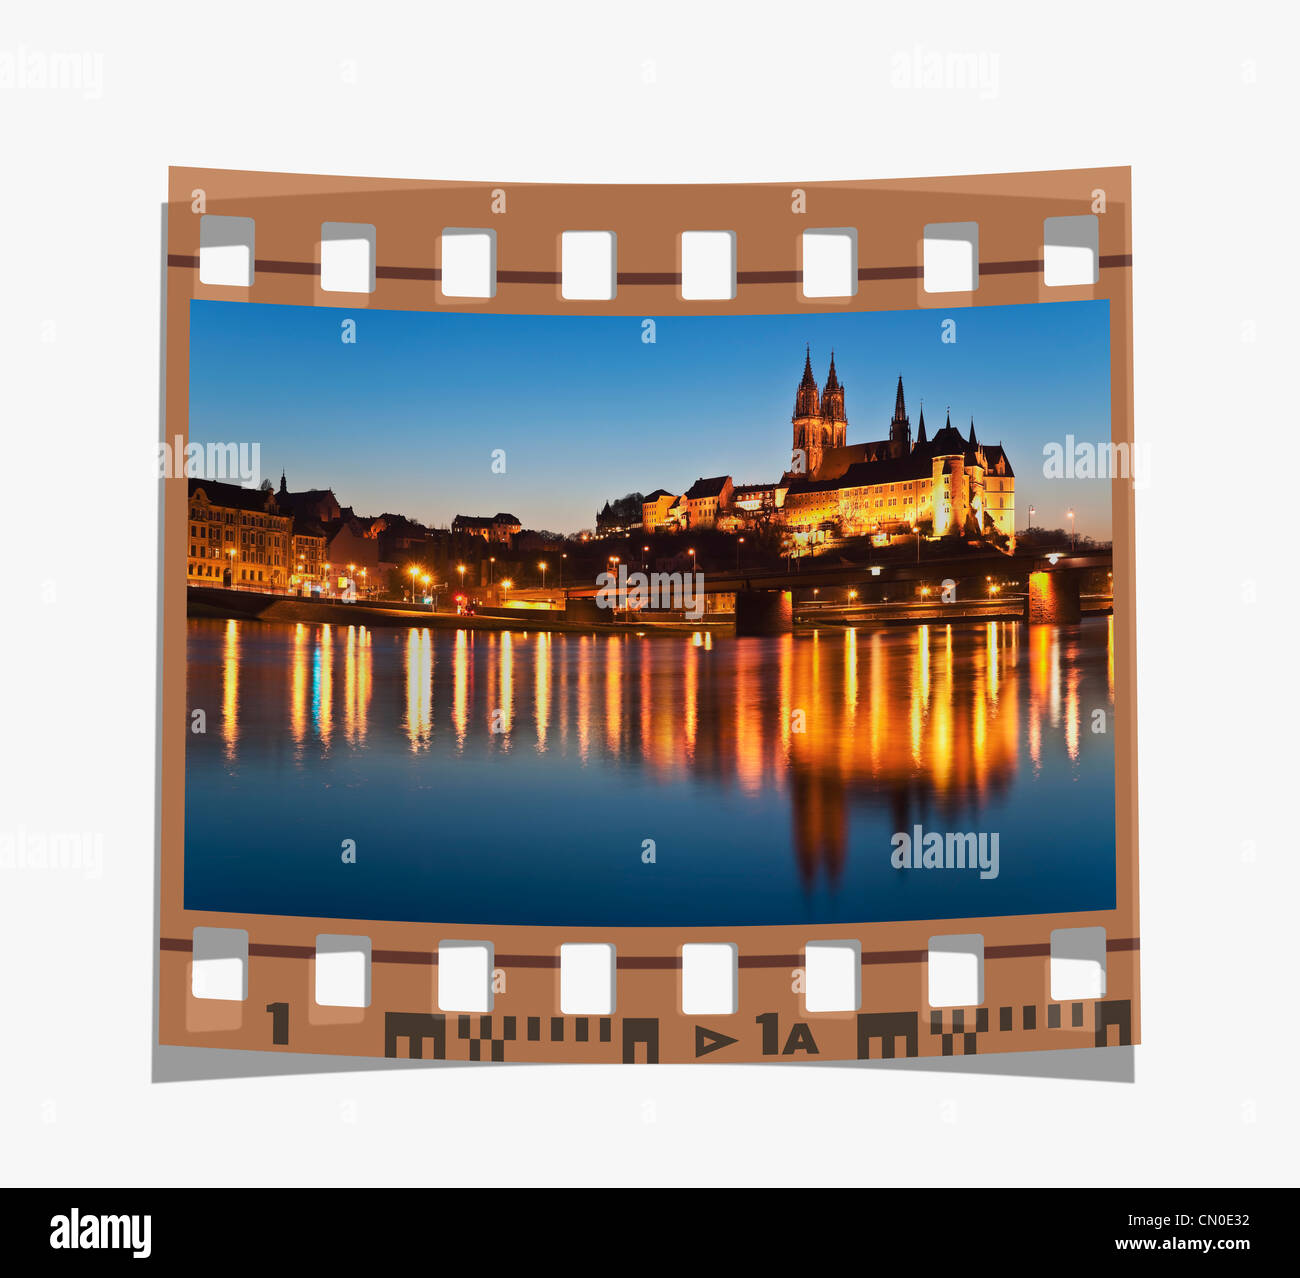 Filmstrip: View over the Elbe river to Albrechtsburg Castle, Meissen, Saxony, Germany, Europe Stock Photo